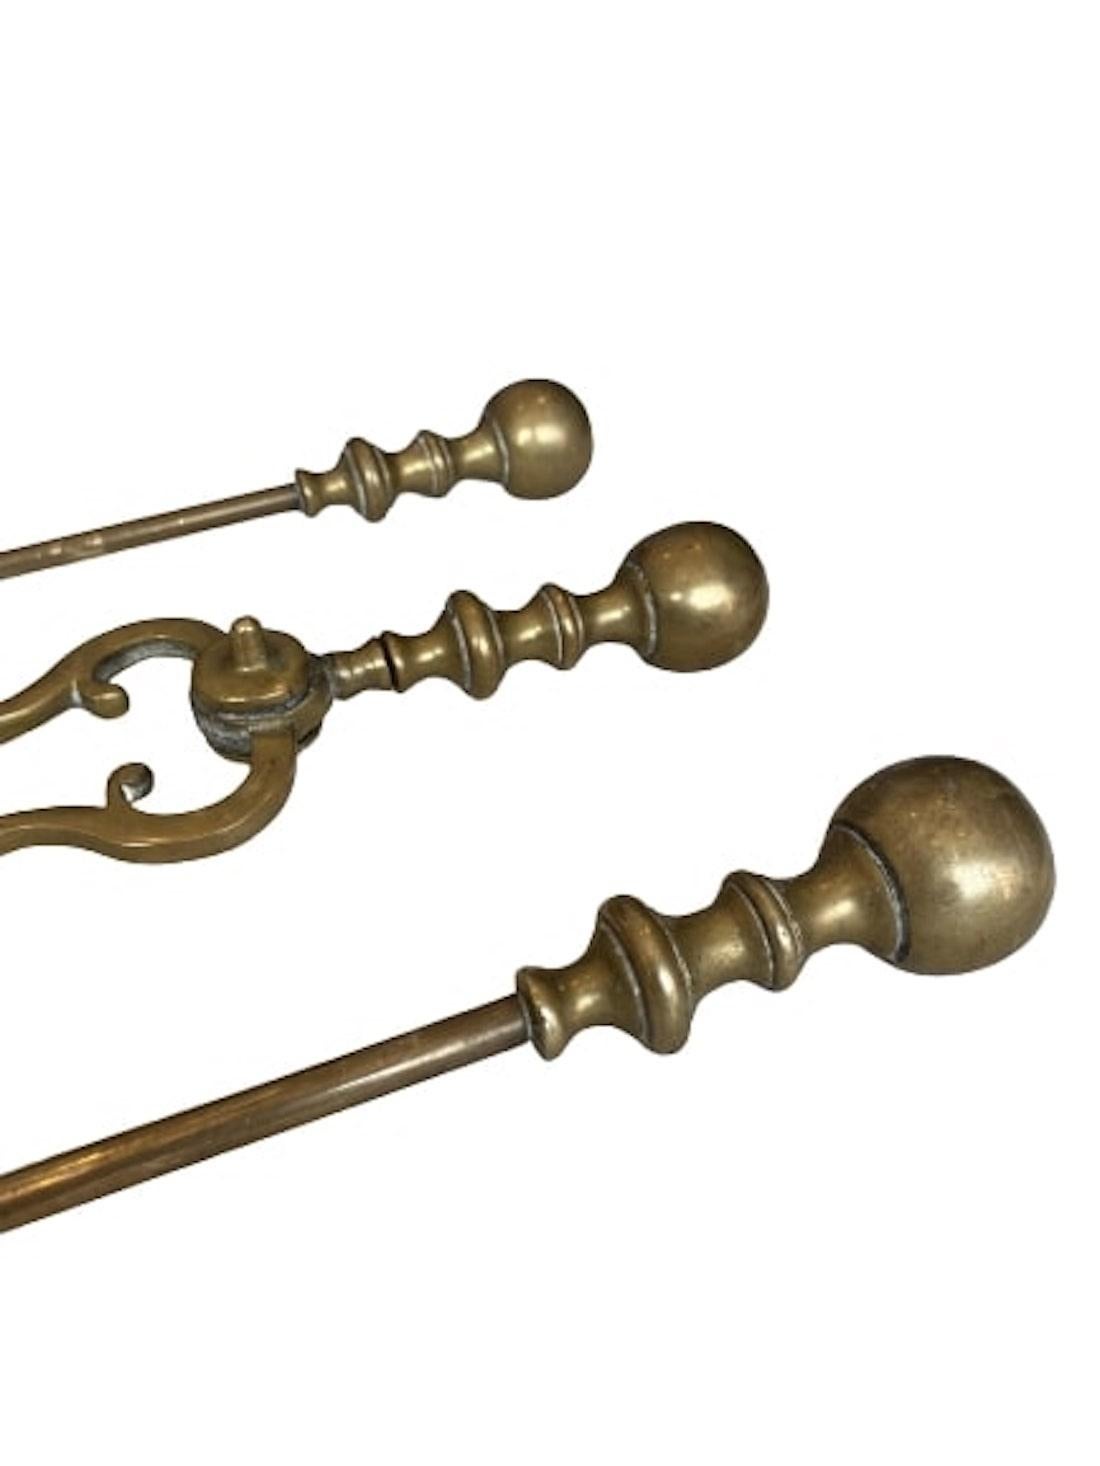 Victorian Gothic Ball Motif Brass Fire Companion Set, 19th Century In Good Condition For Sale In Southall, GB